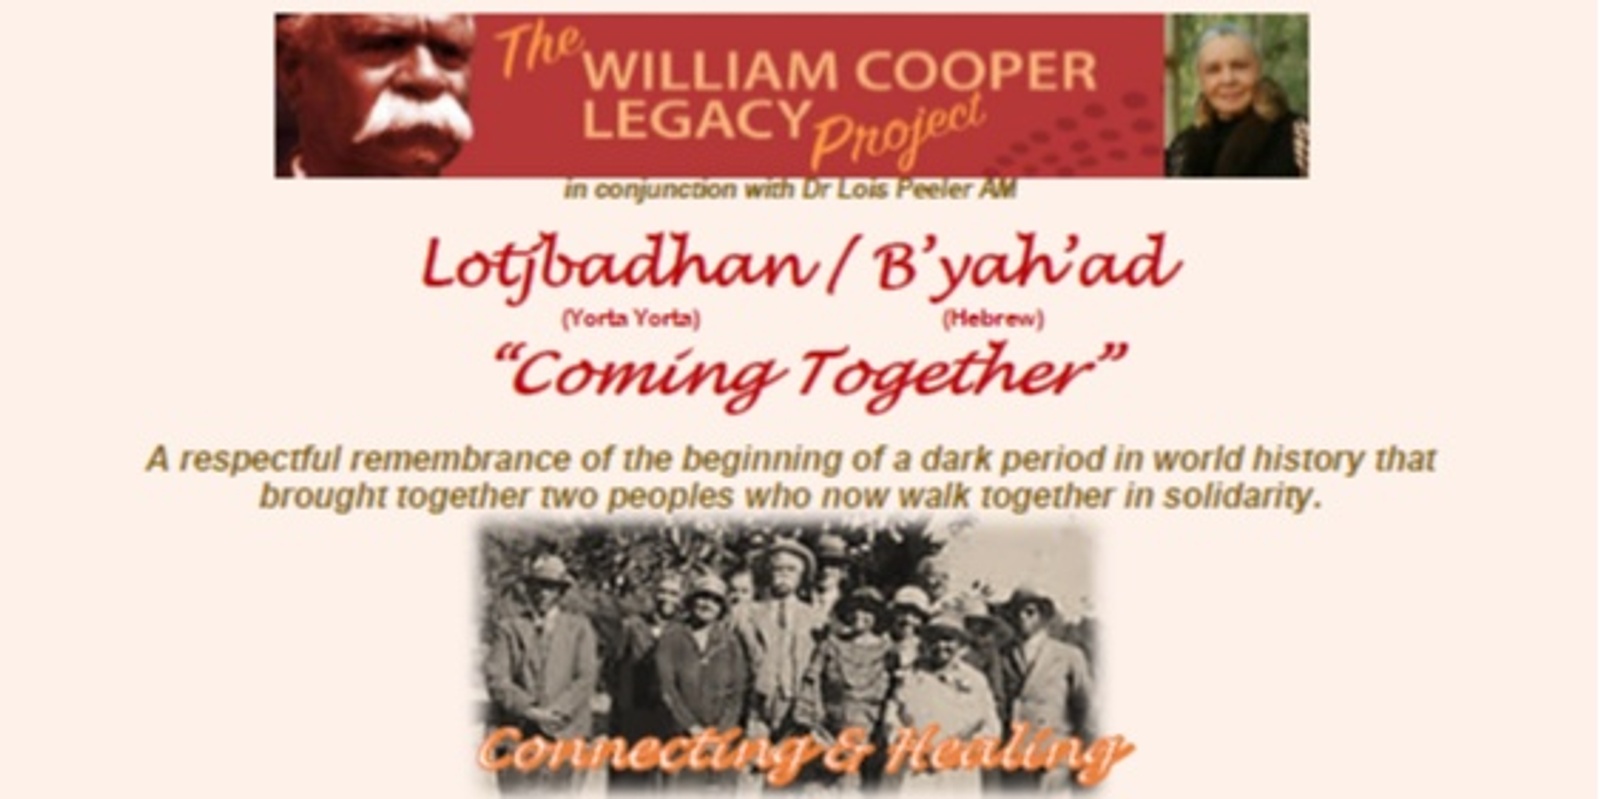 Banner image for Lotjbadhan / B’yah’ad / Coming Together